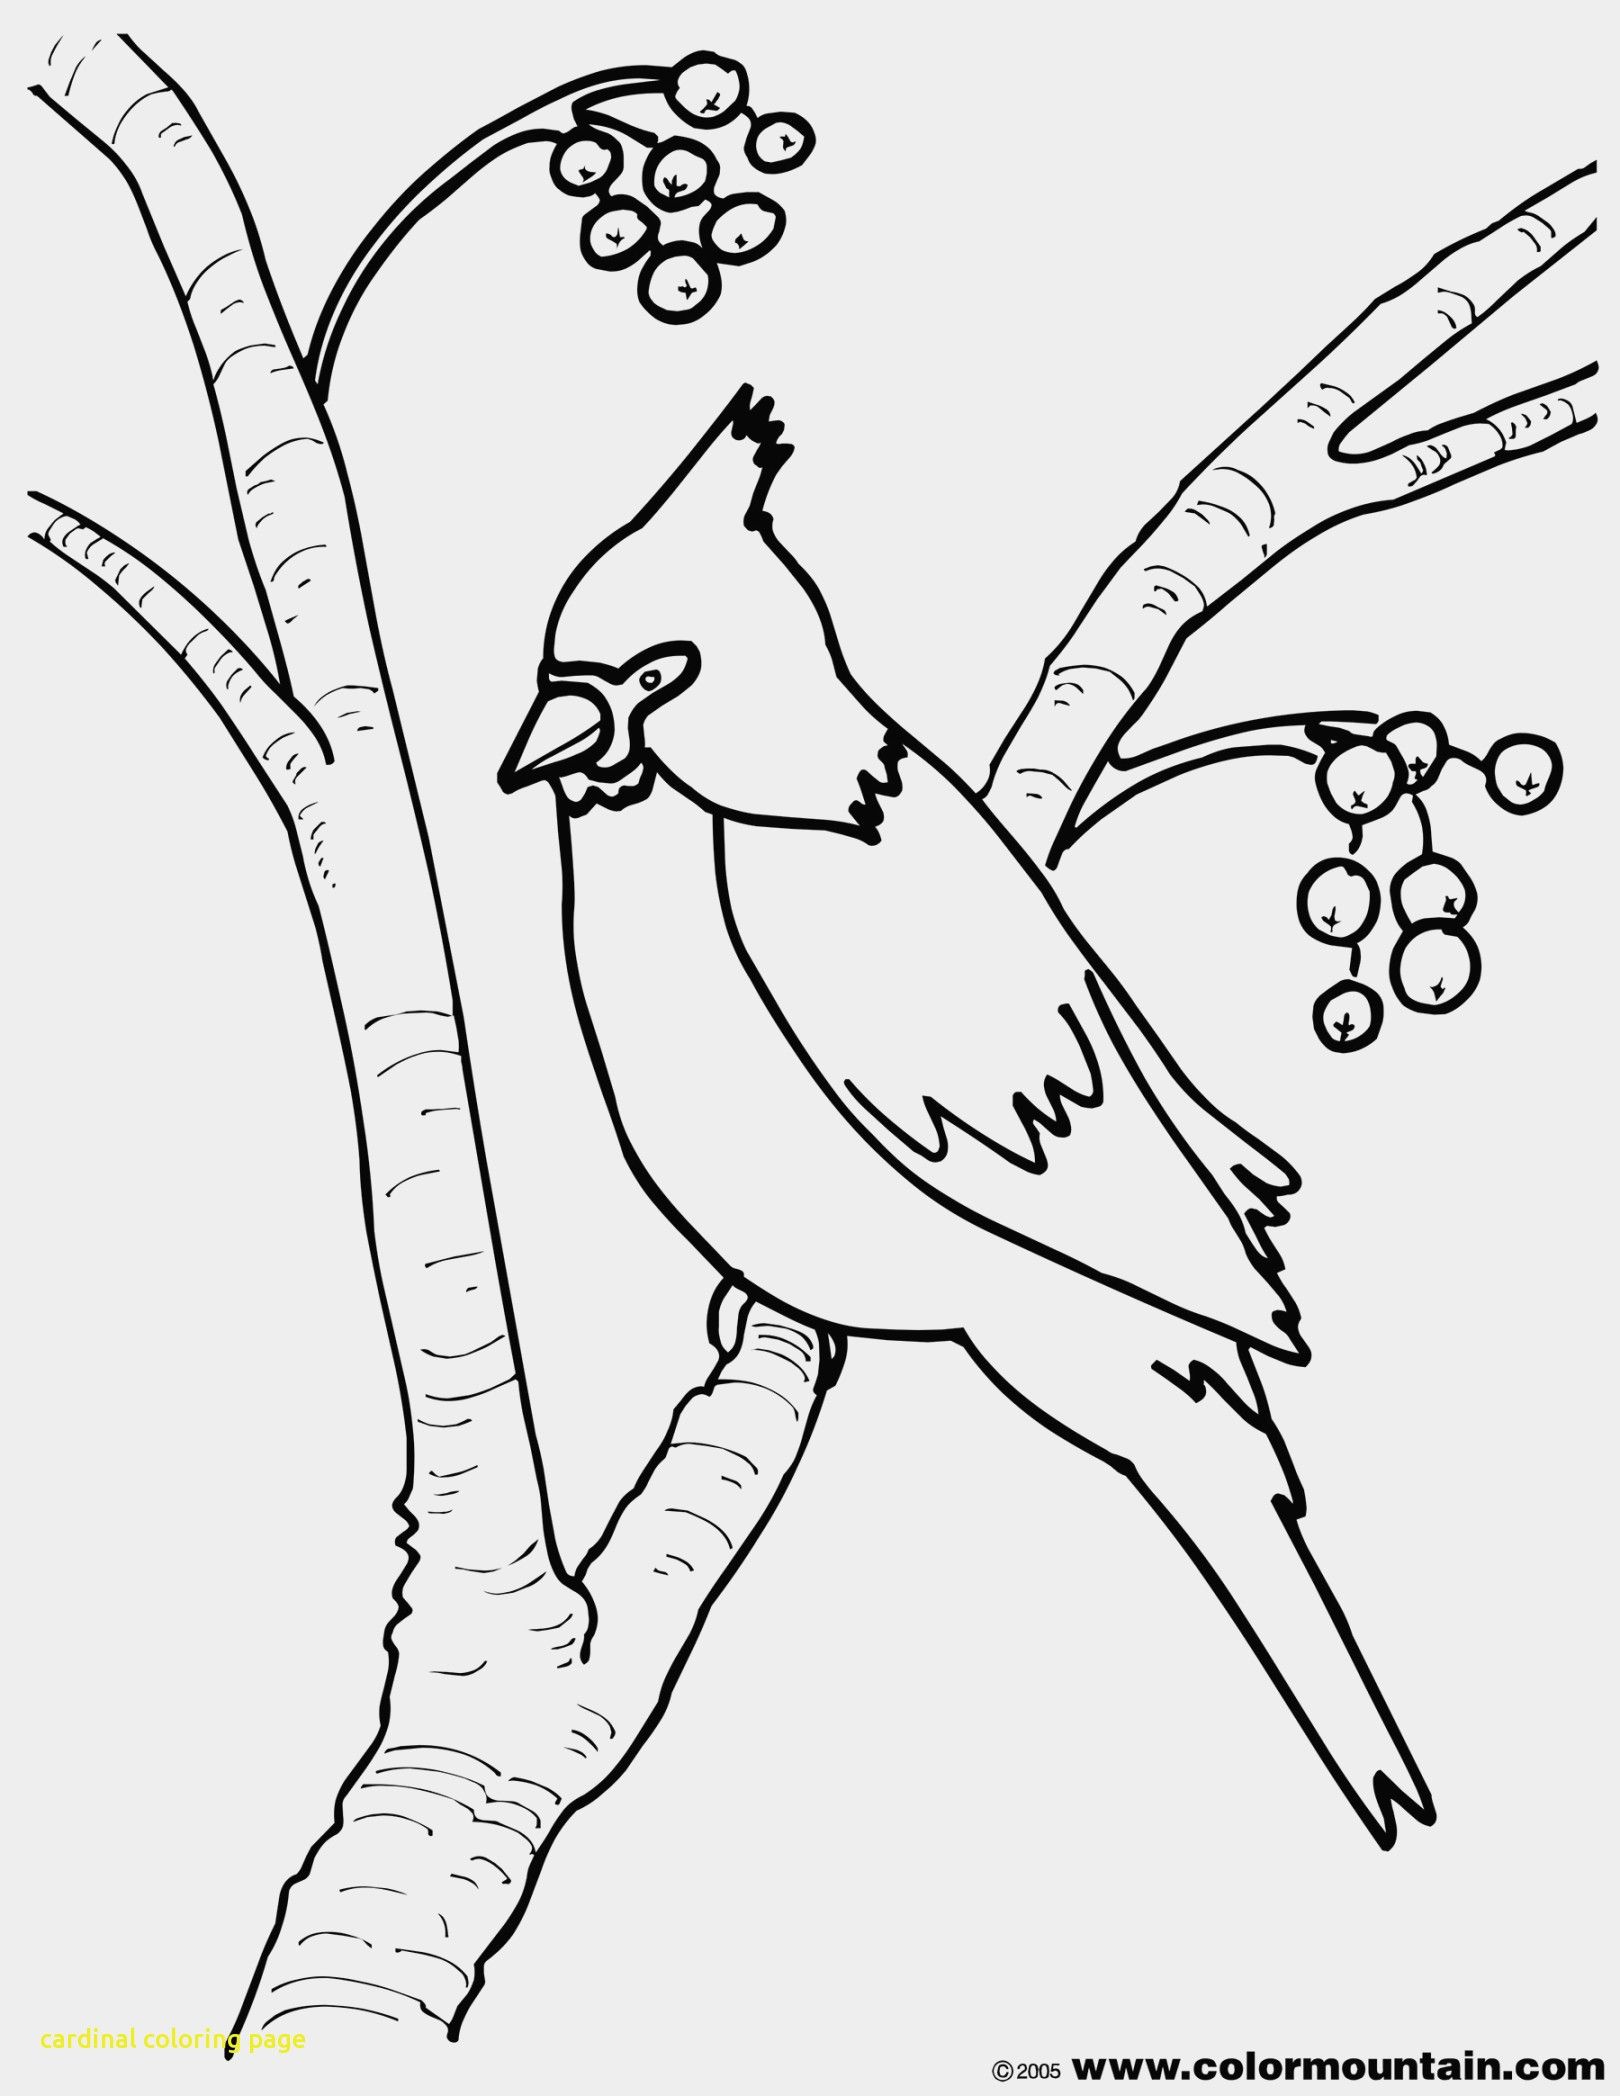 cardinals-logo-coloring-pages-at-getcolorings-free-printable